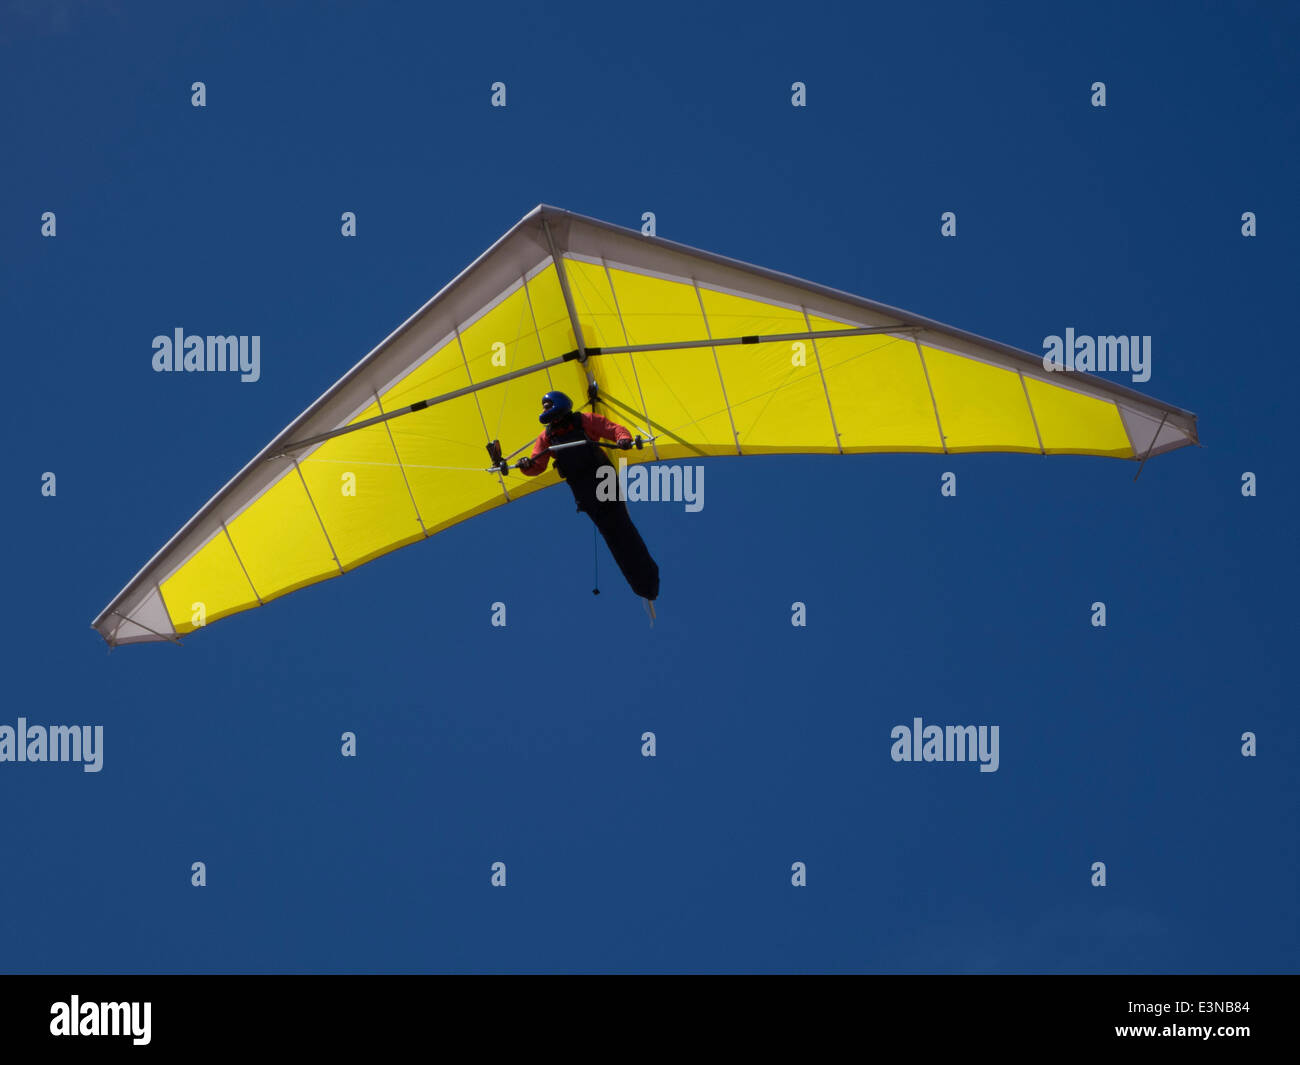 Low angle view of a person hang-gliding against clear blue sky Stock Photo